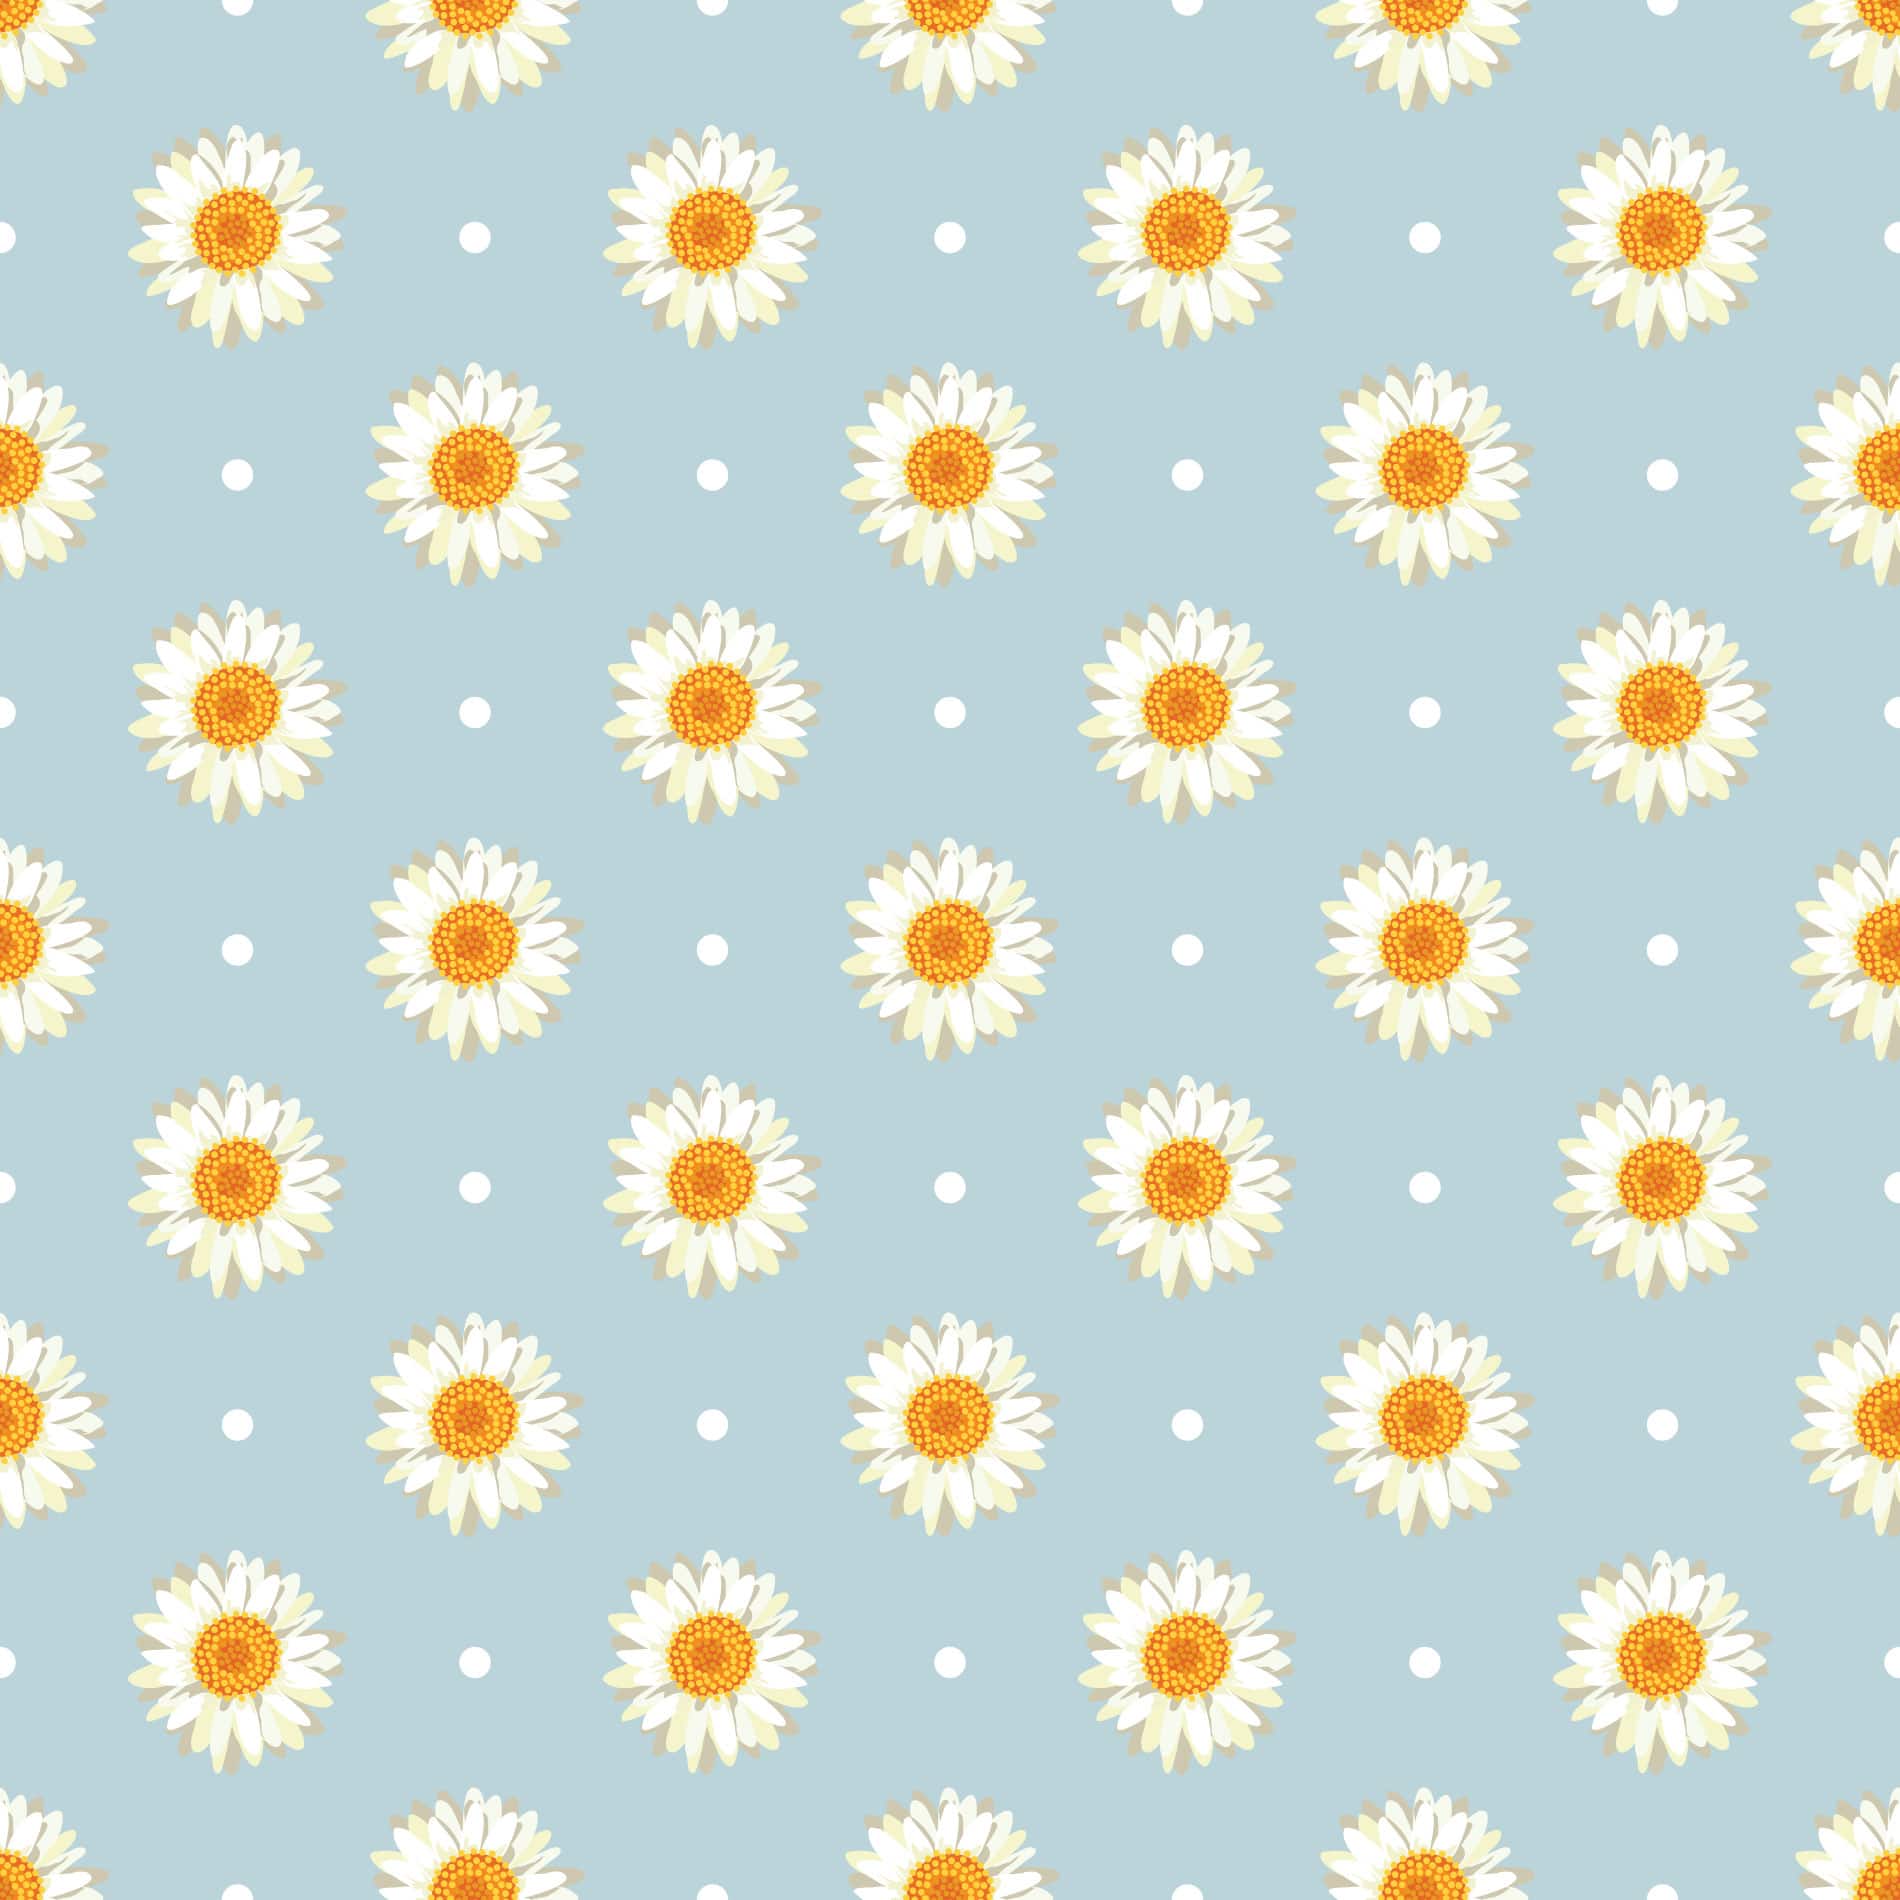 Aesthetic Daisies Polka Dot Wallpaper And Stick Or Non Pasted